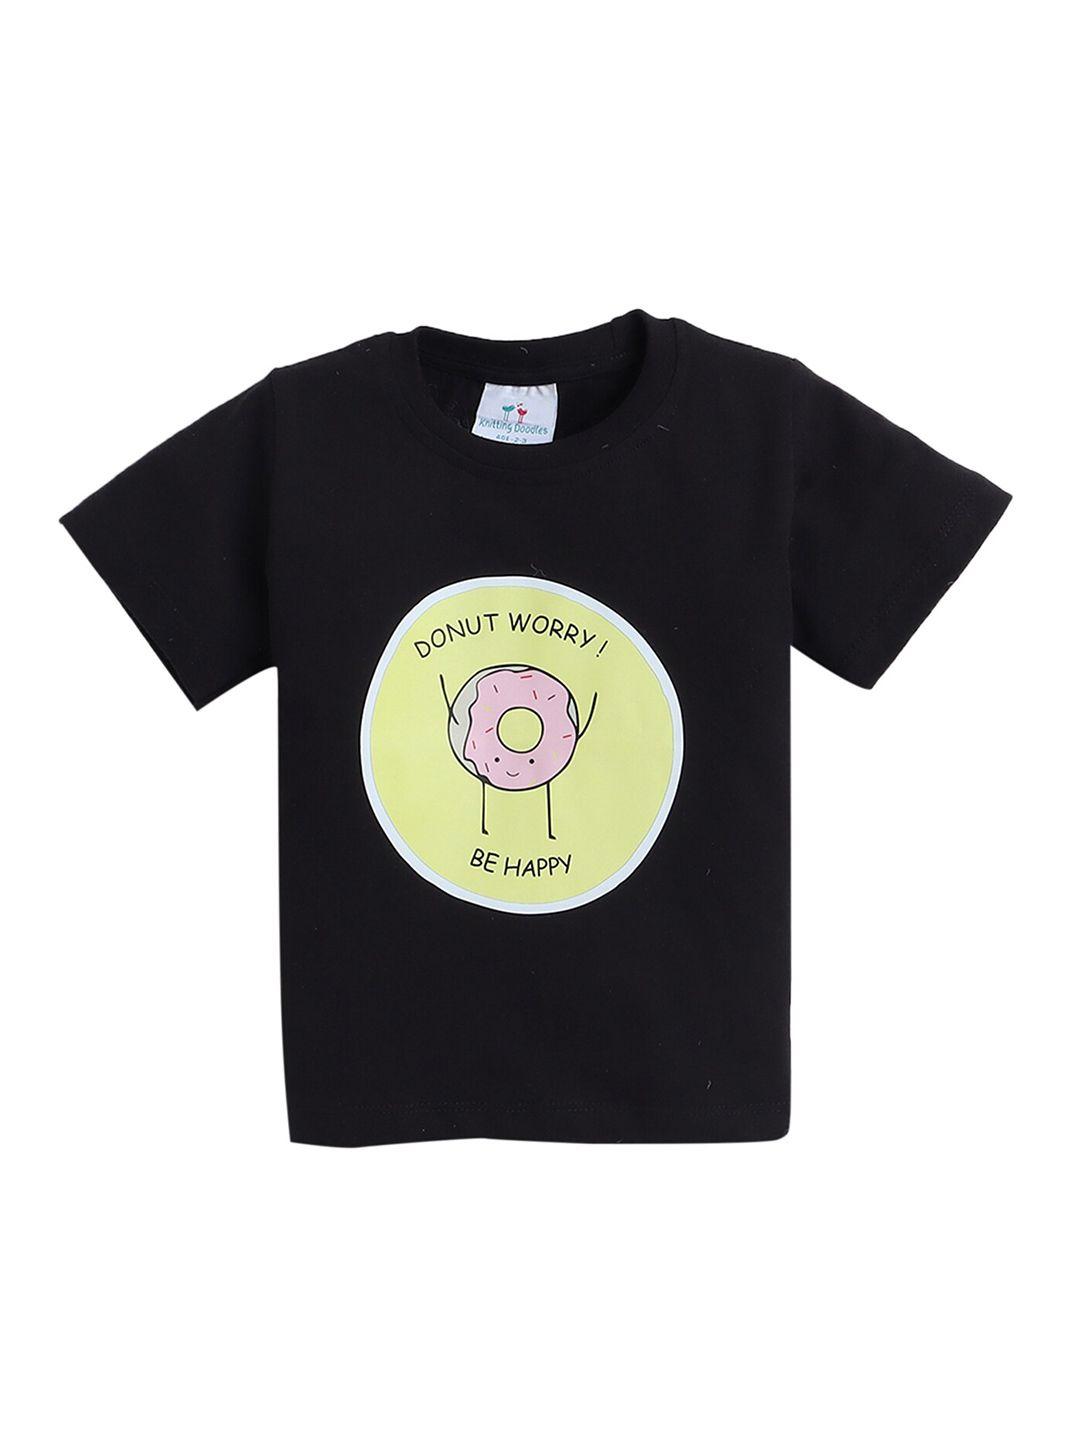 knitting-doodles-boys-donut-worry-be-happy-printed-round-neck-regular-fit-cotton-t-shirt